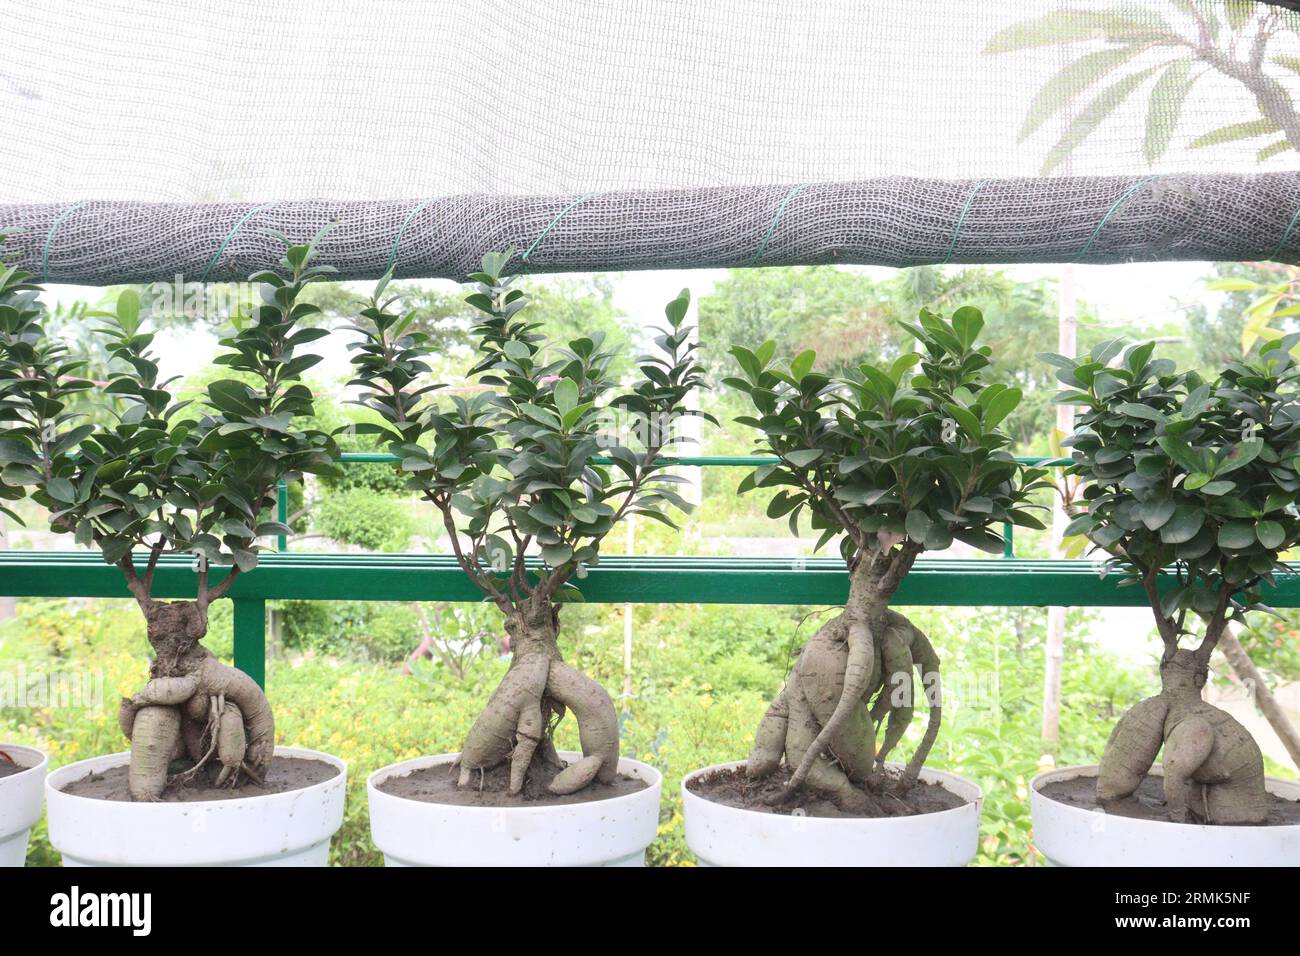 Ficus microcarpa tree on pot in farm, it can root, bark, and leaf latex are used to treat wounds, headaches, liver diseases, toothache, and ulcers. Ae Stock Photo